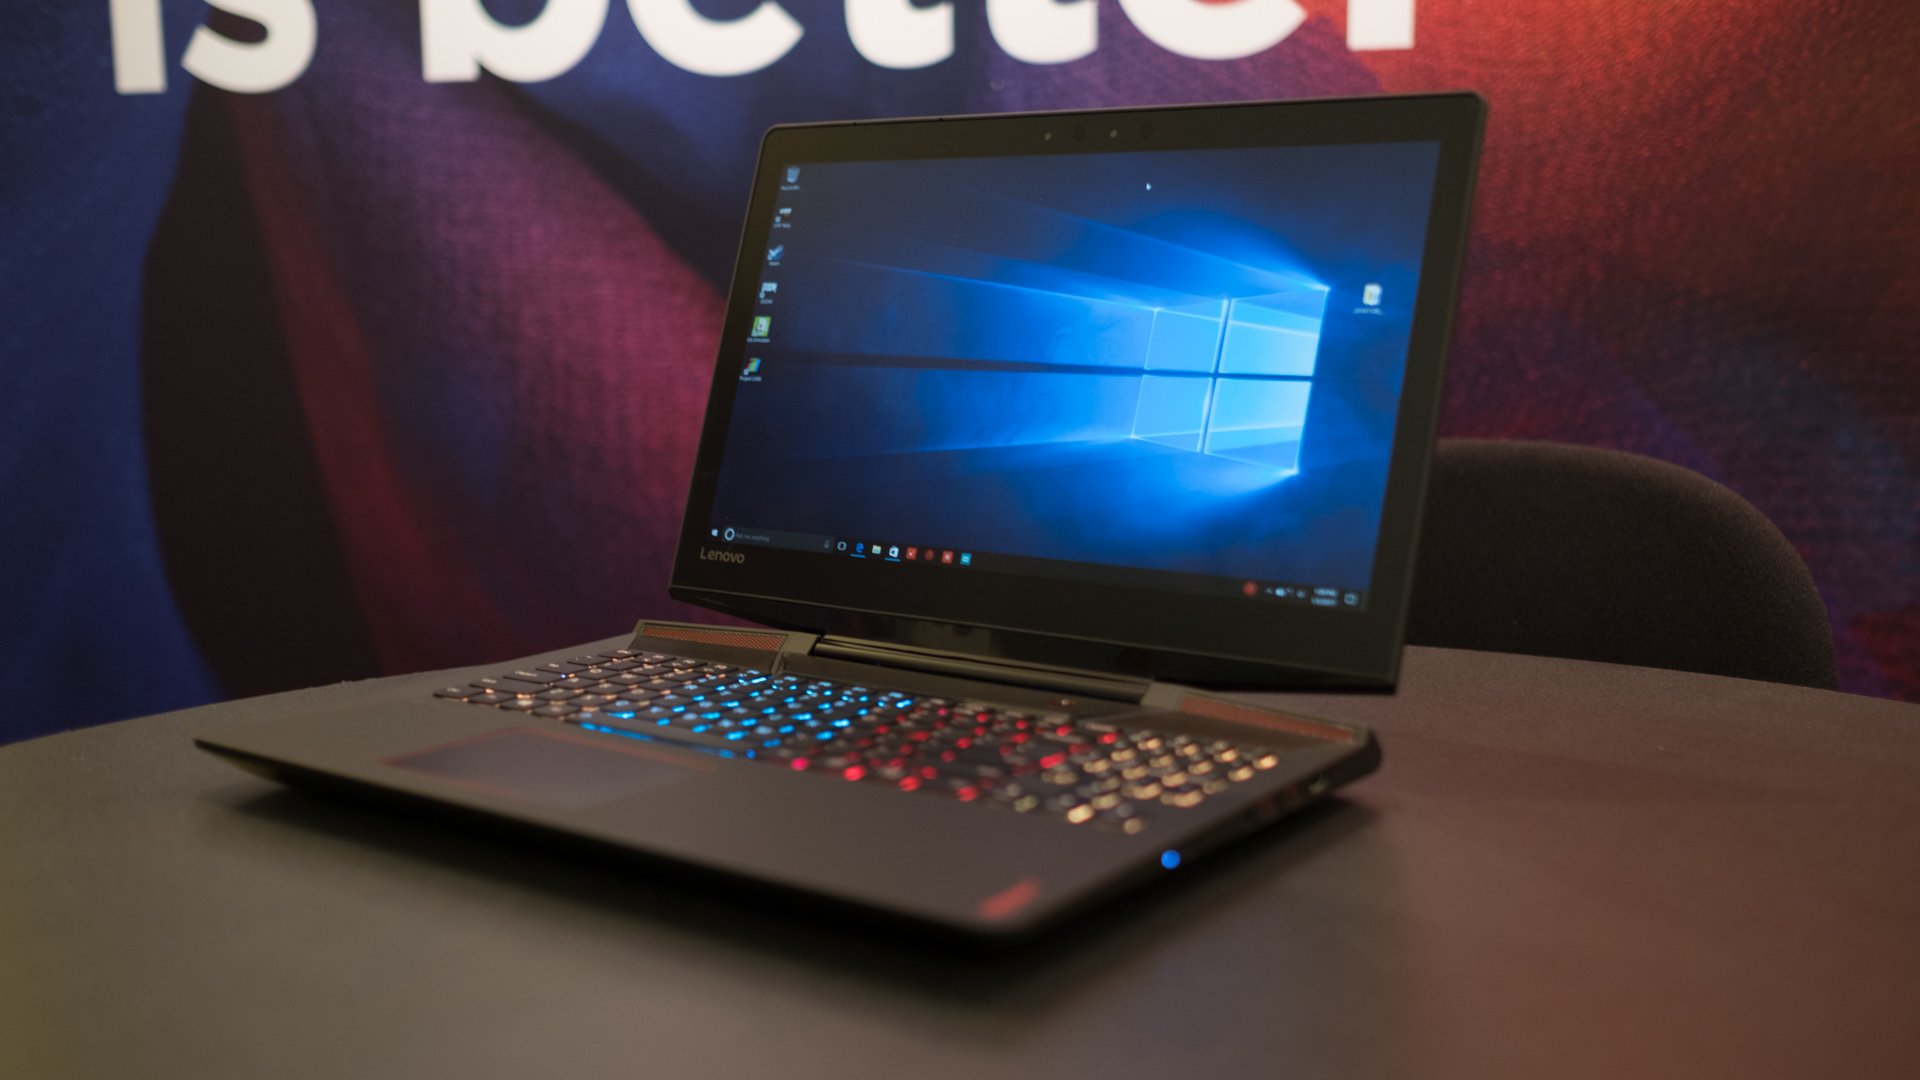 10 best gaming laptops in the UAE for 2018: top gaming notebook reviews